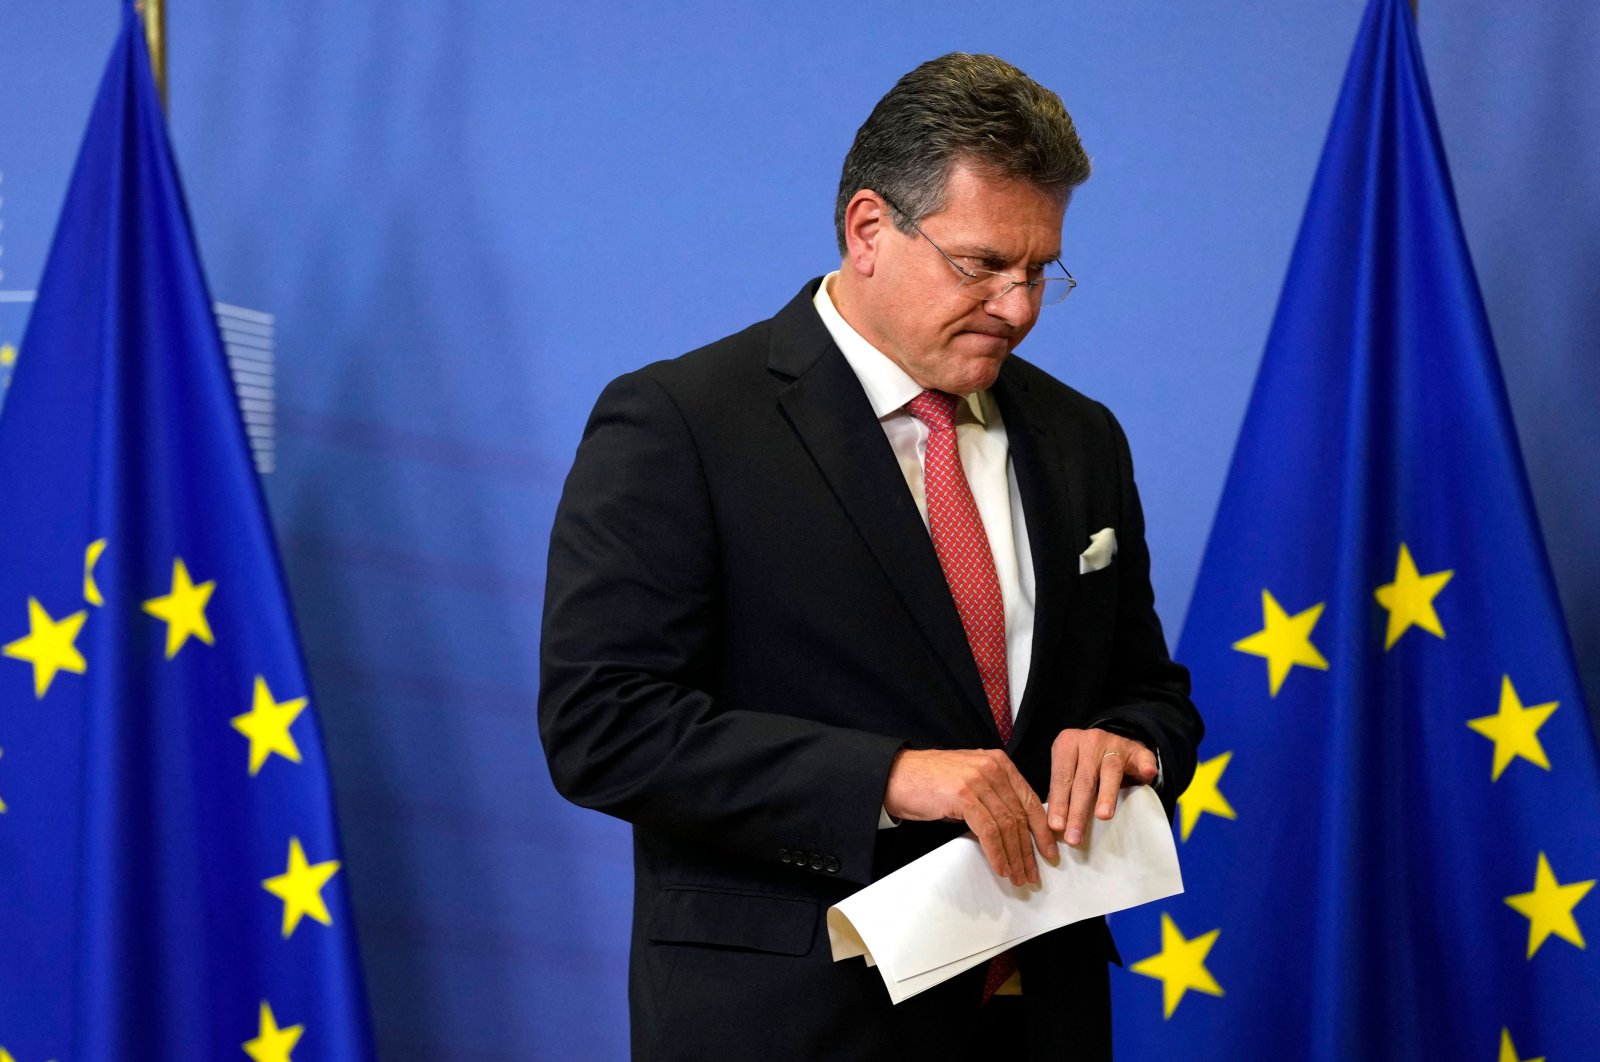 European Commissioner for Interinstitutional Relations and Foresight Maros Sefcovic leaves the podium after addressing media representatives during a press conference at EU headquarters, Brussels, Belgium, Nov. 5, 2021. (AFP Photo)